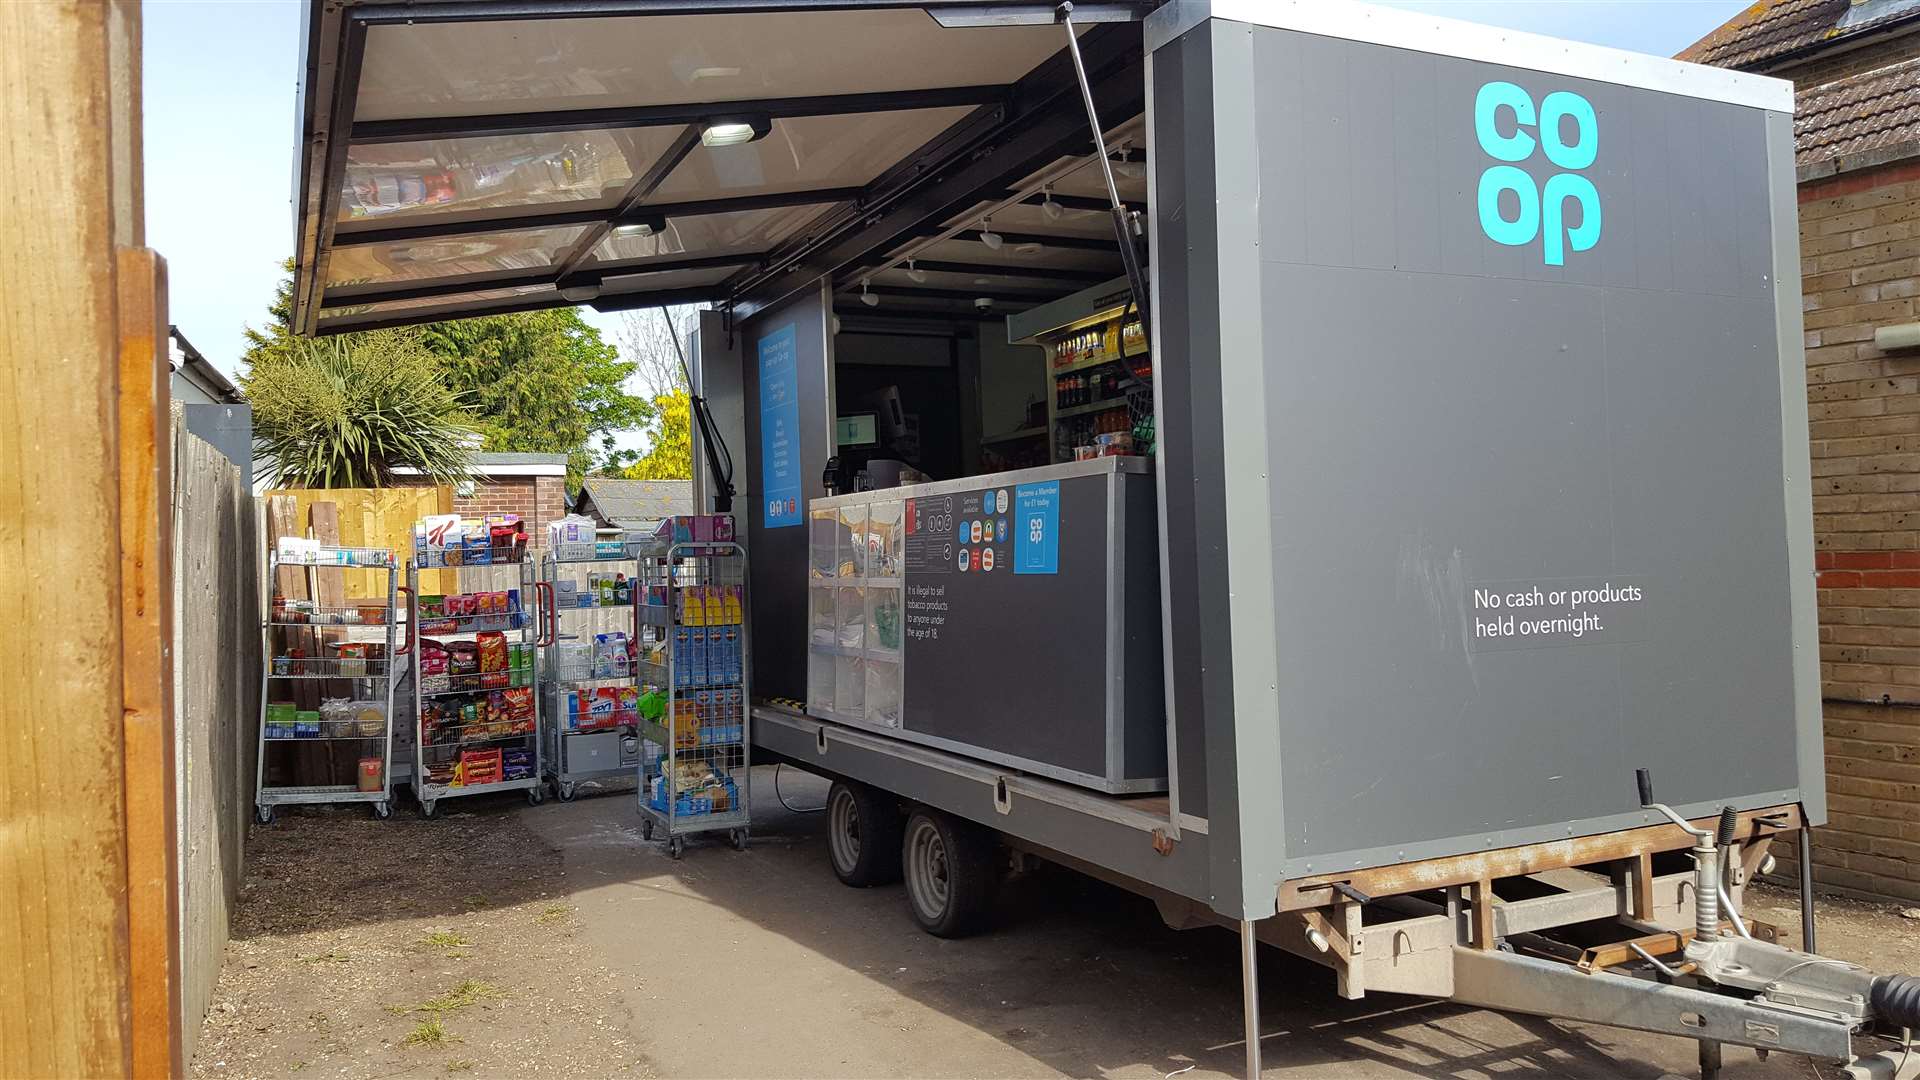 The Co-op had set up a pop-up shop in the yard next to their store in Upchurch which was badly damaged in a fire